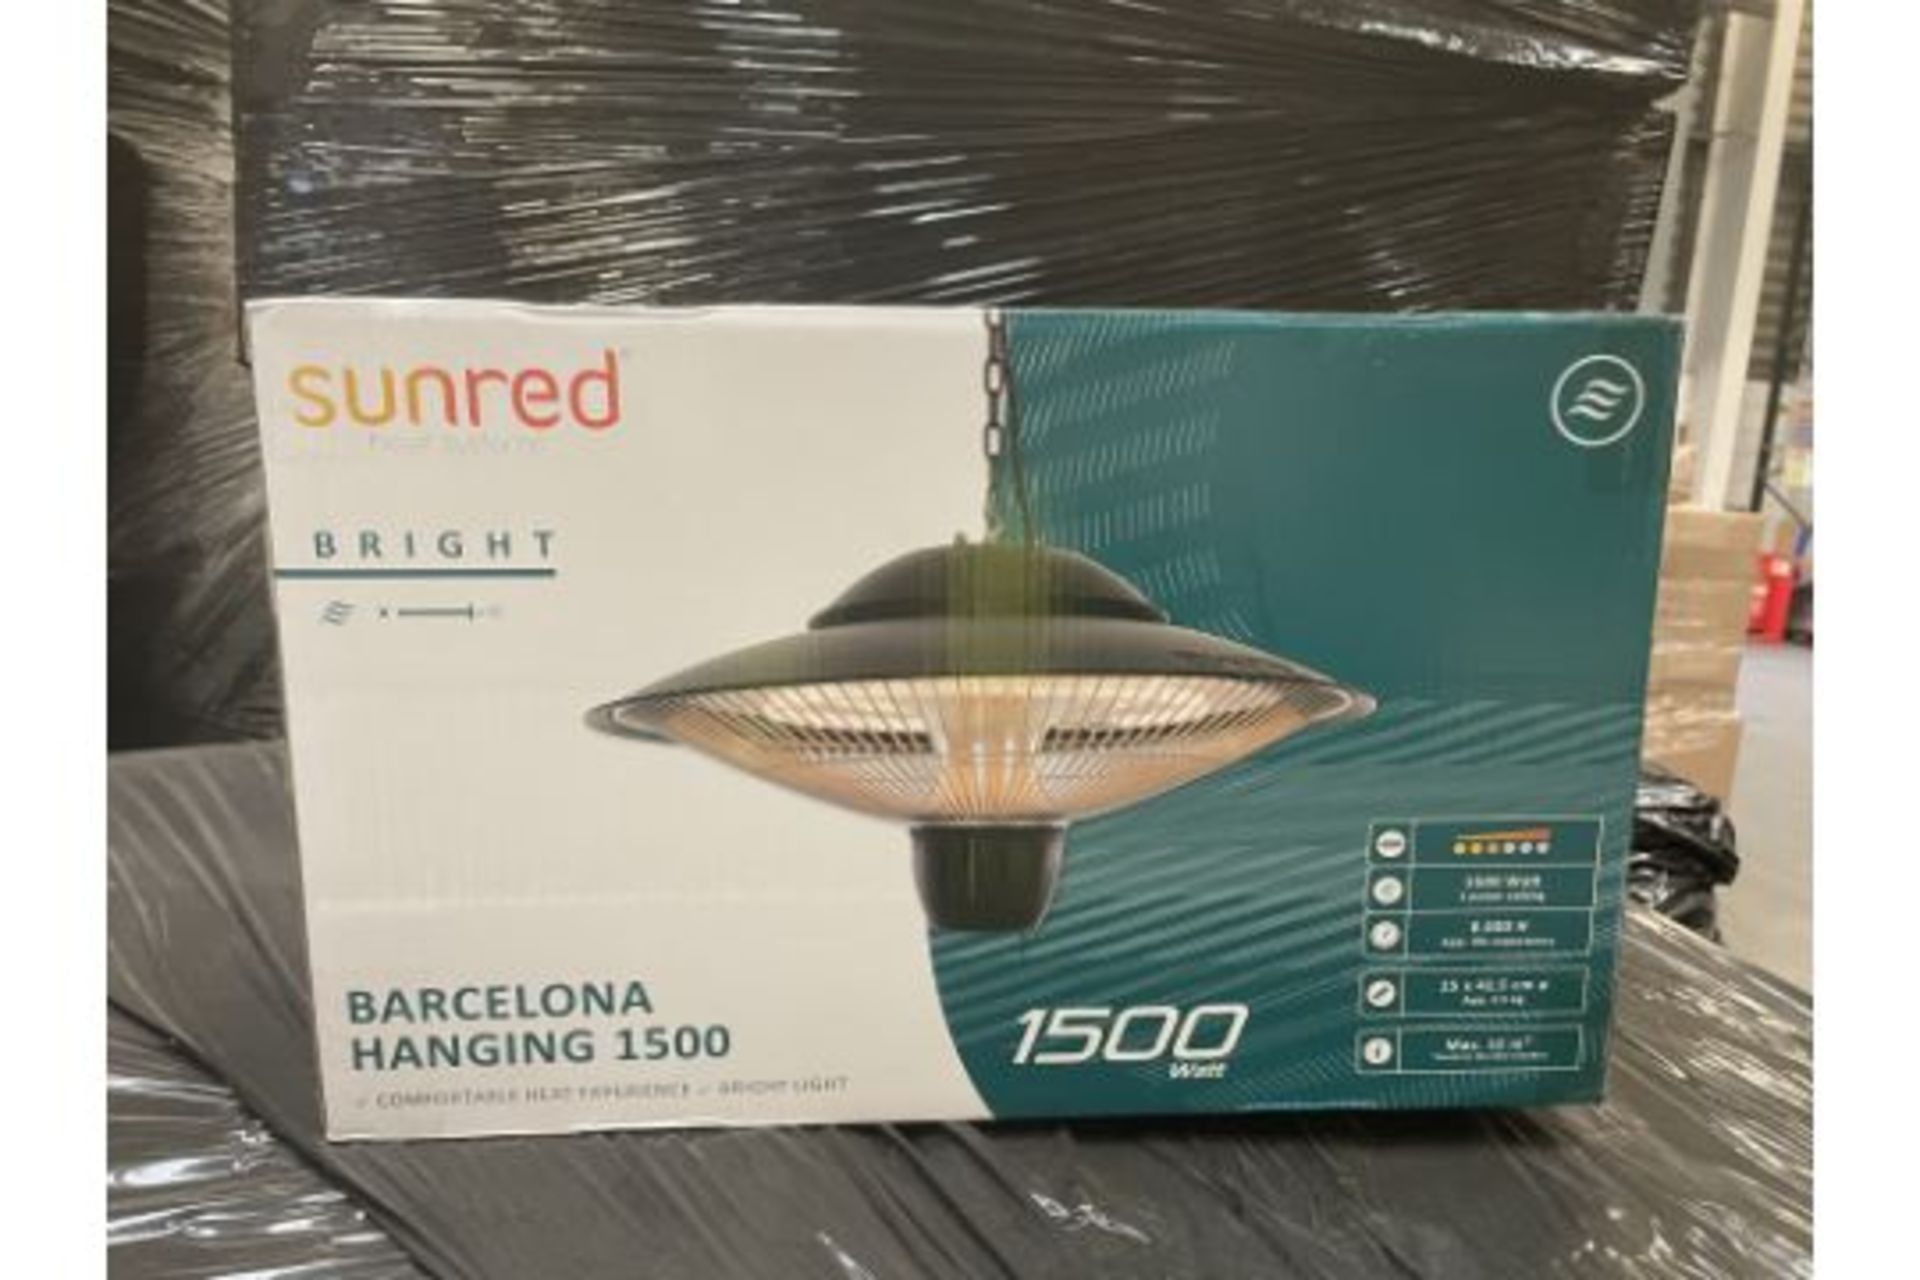 Brand New The Sunred Heater Barcelona Hanging 1500W RRP £299.A high quality and efficient outdoor - Image 3 of 3